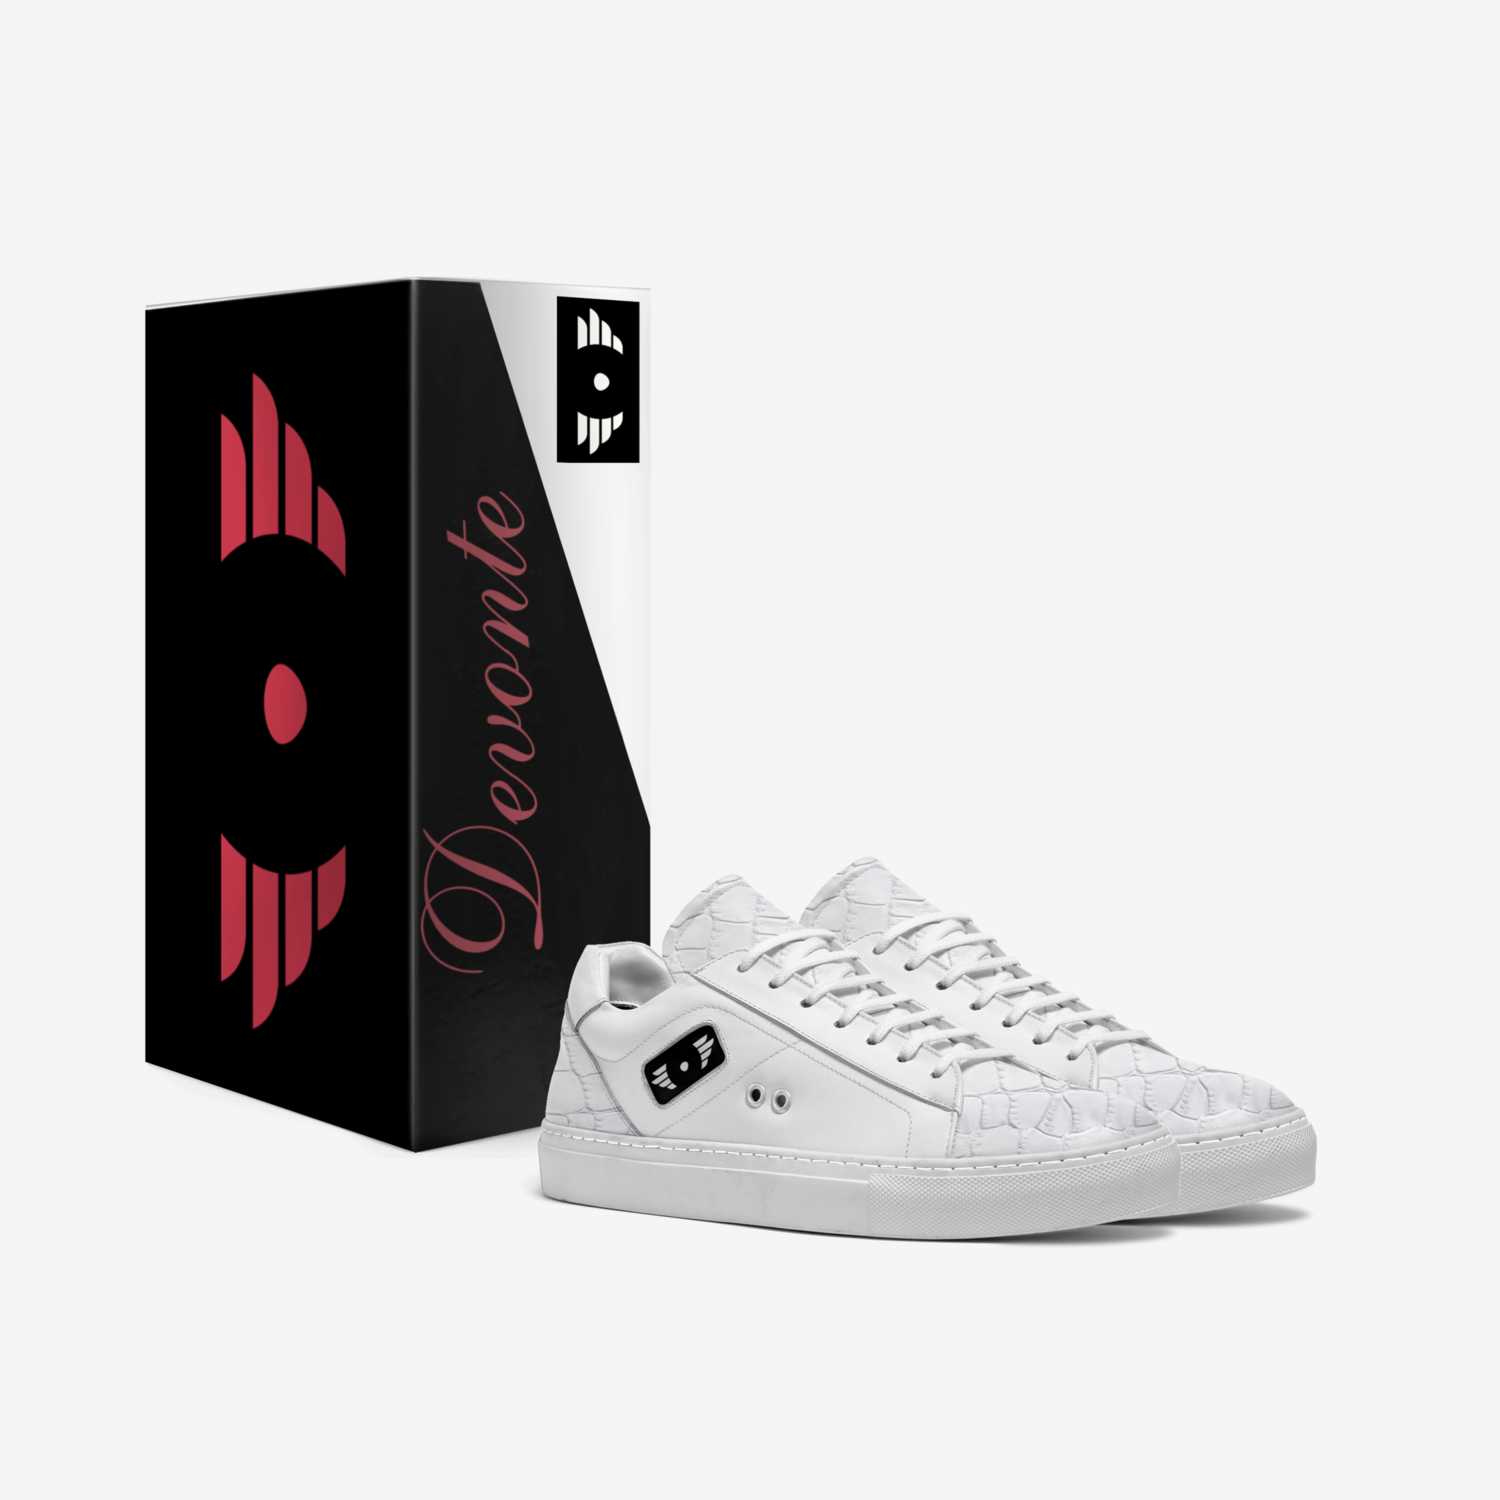 DEVONTE  custom made in Italy shoes by De'Andre Brister | Box view